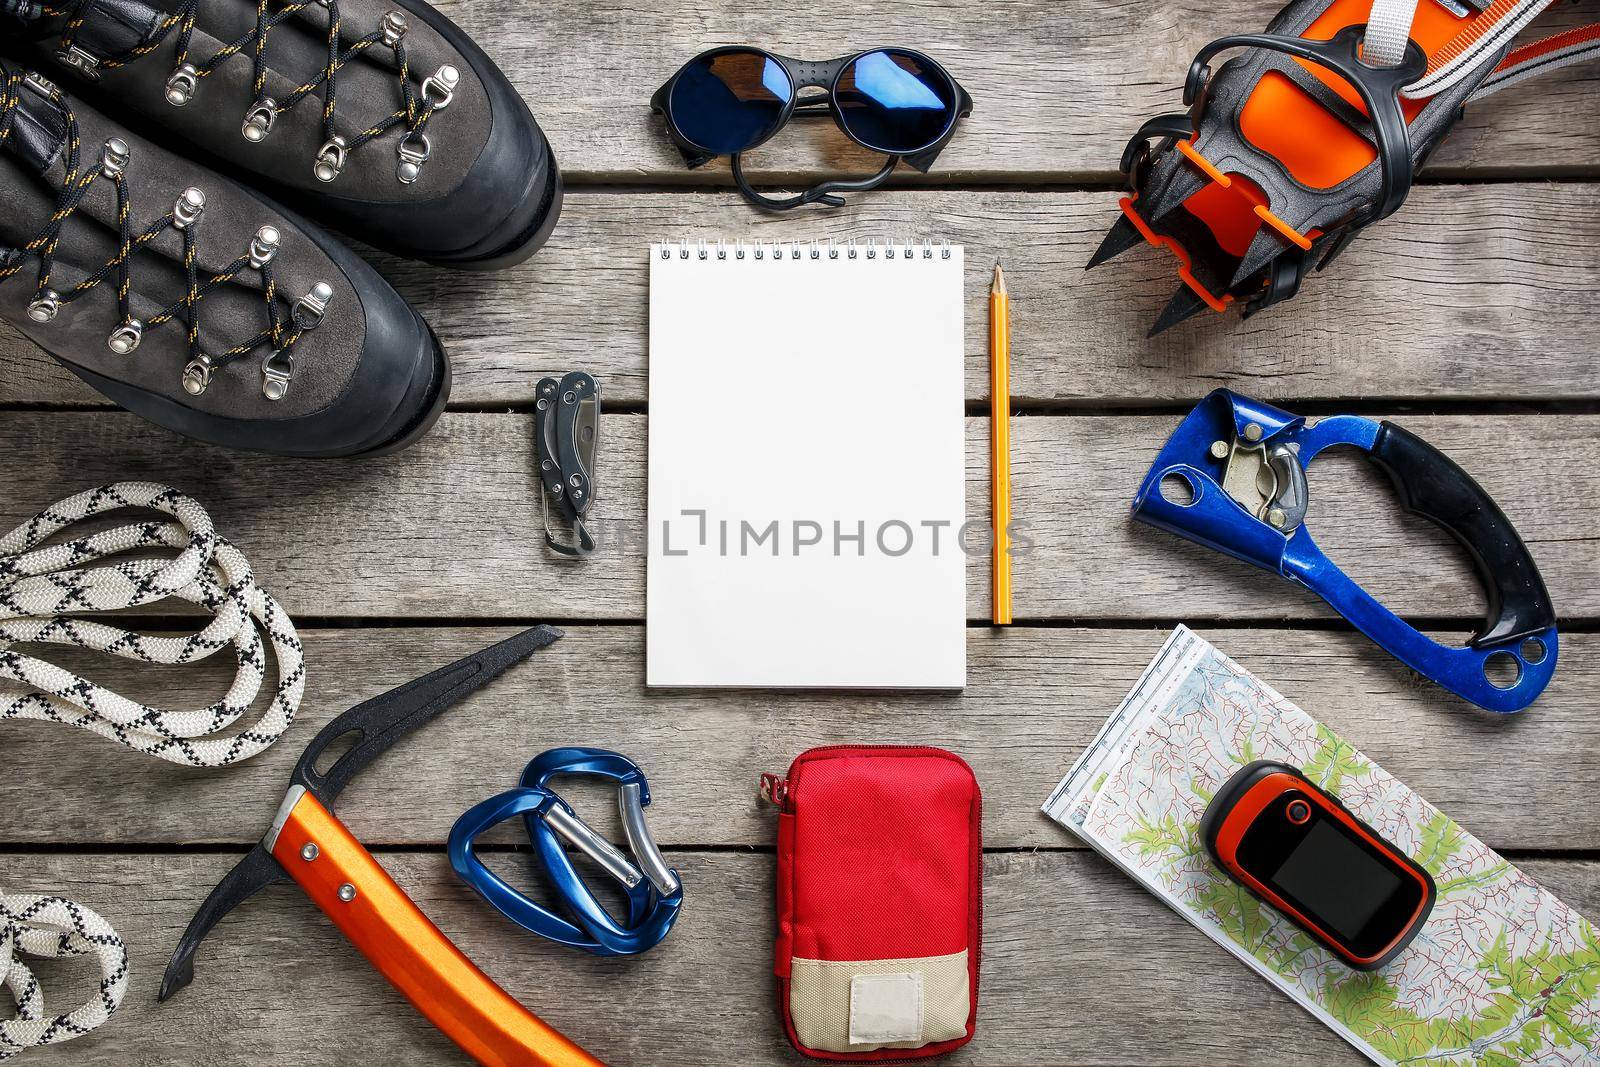 Top view of tourist equipment for a mountain trip on a rustic light wooden floor with a notebook, pencil and empty space in the middle. Items include glasses, a card, a multi-knife, a rope, a carbine, a flashlight, a first aid kit, an ice ax, a GPS, mountaineering cats.